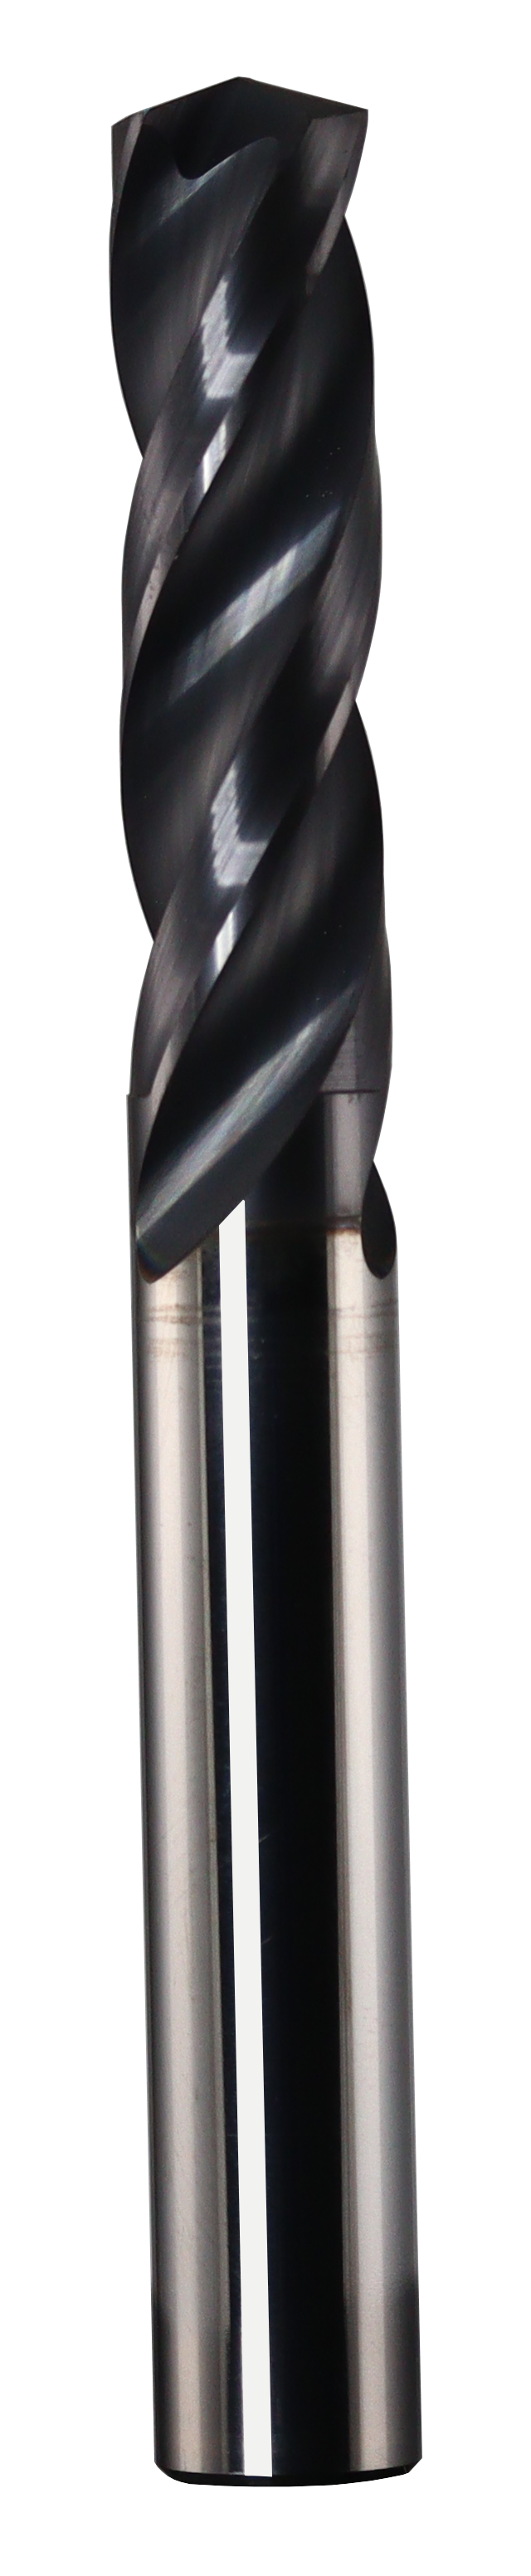 10.00mm Dia, 150 Degree Point, Solid Carbide Drill - 69035